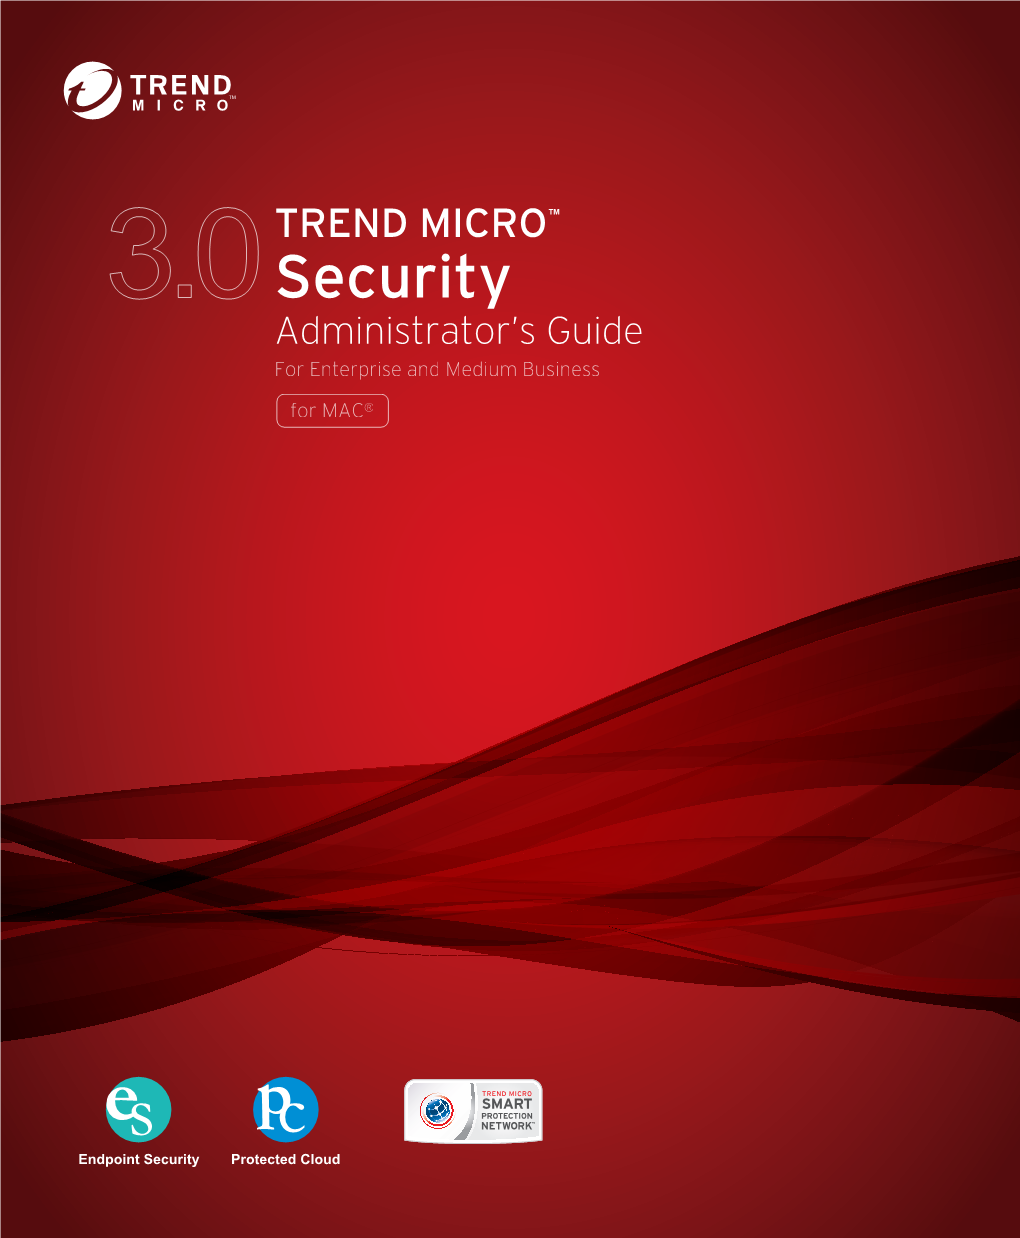 Trend Micro Security (For Mac) 3.0 Administrator's Guide